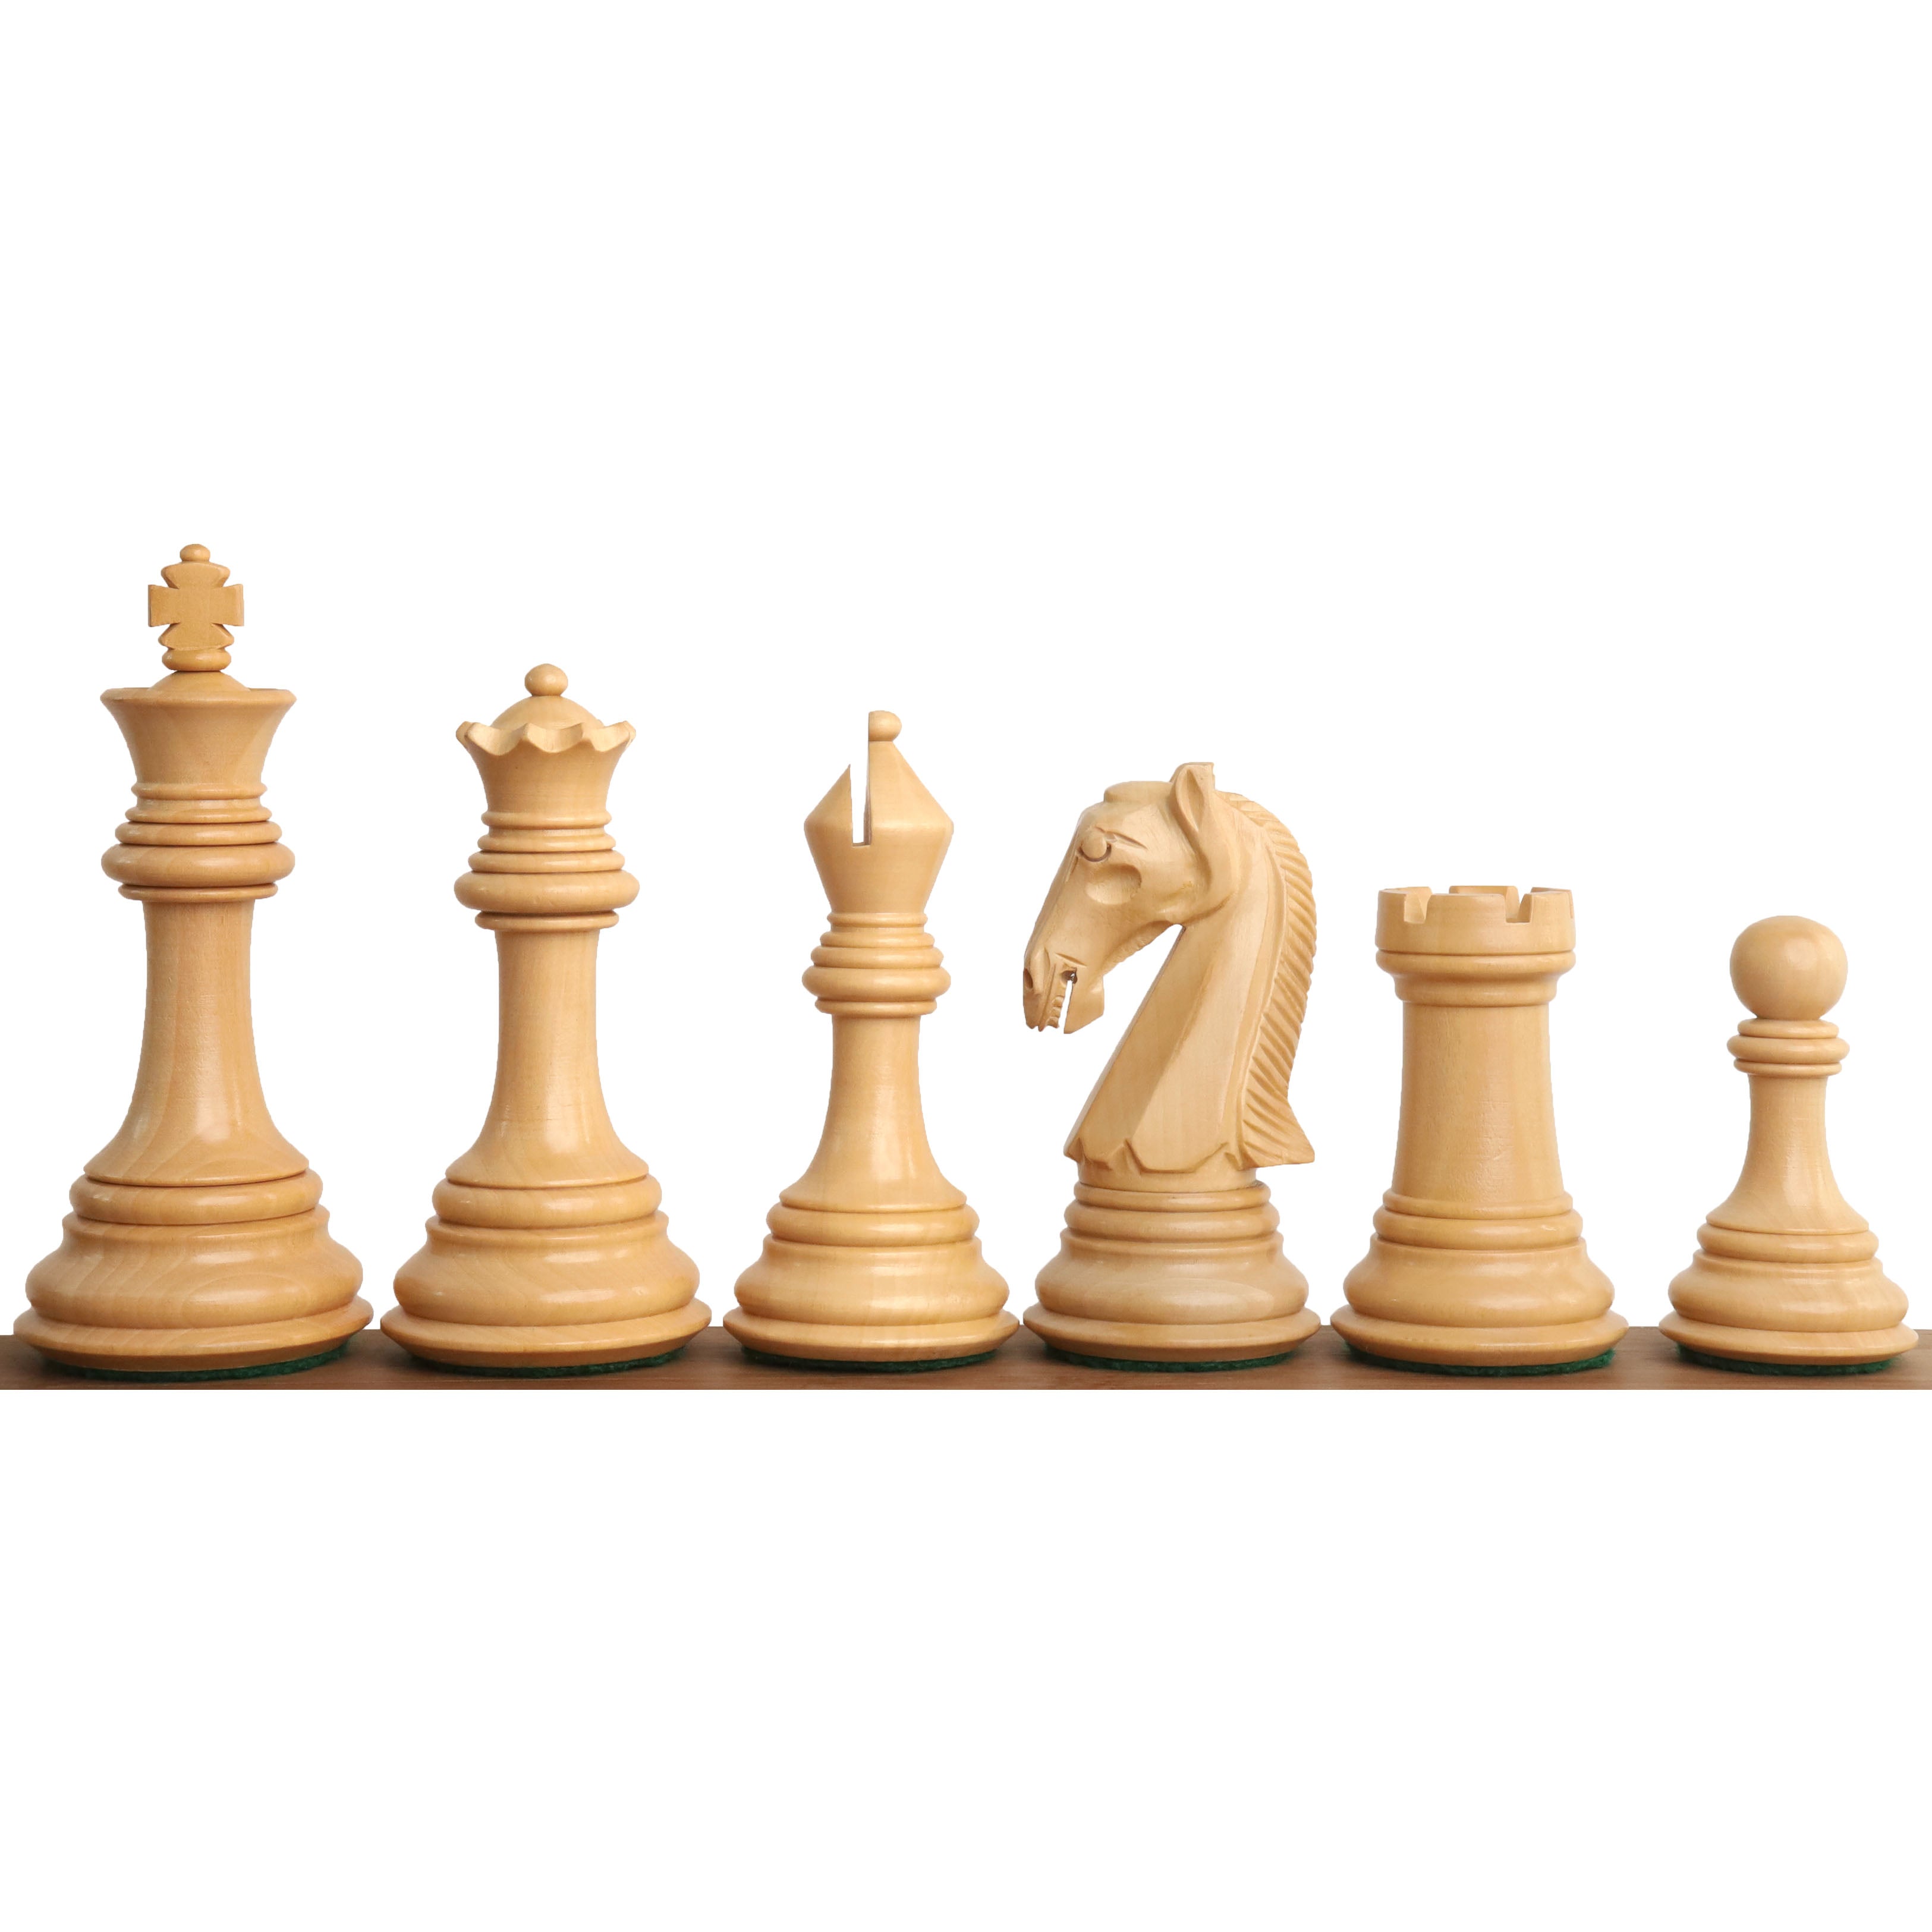 Slightly Imperfect 3.9" New Columbian Staunton Chess Pieces Only Set - Bud Rosewood - Double Weighted